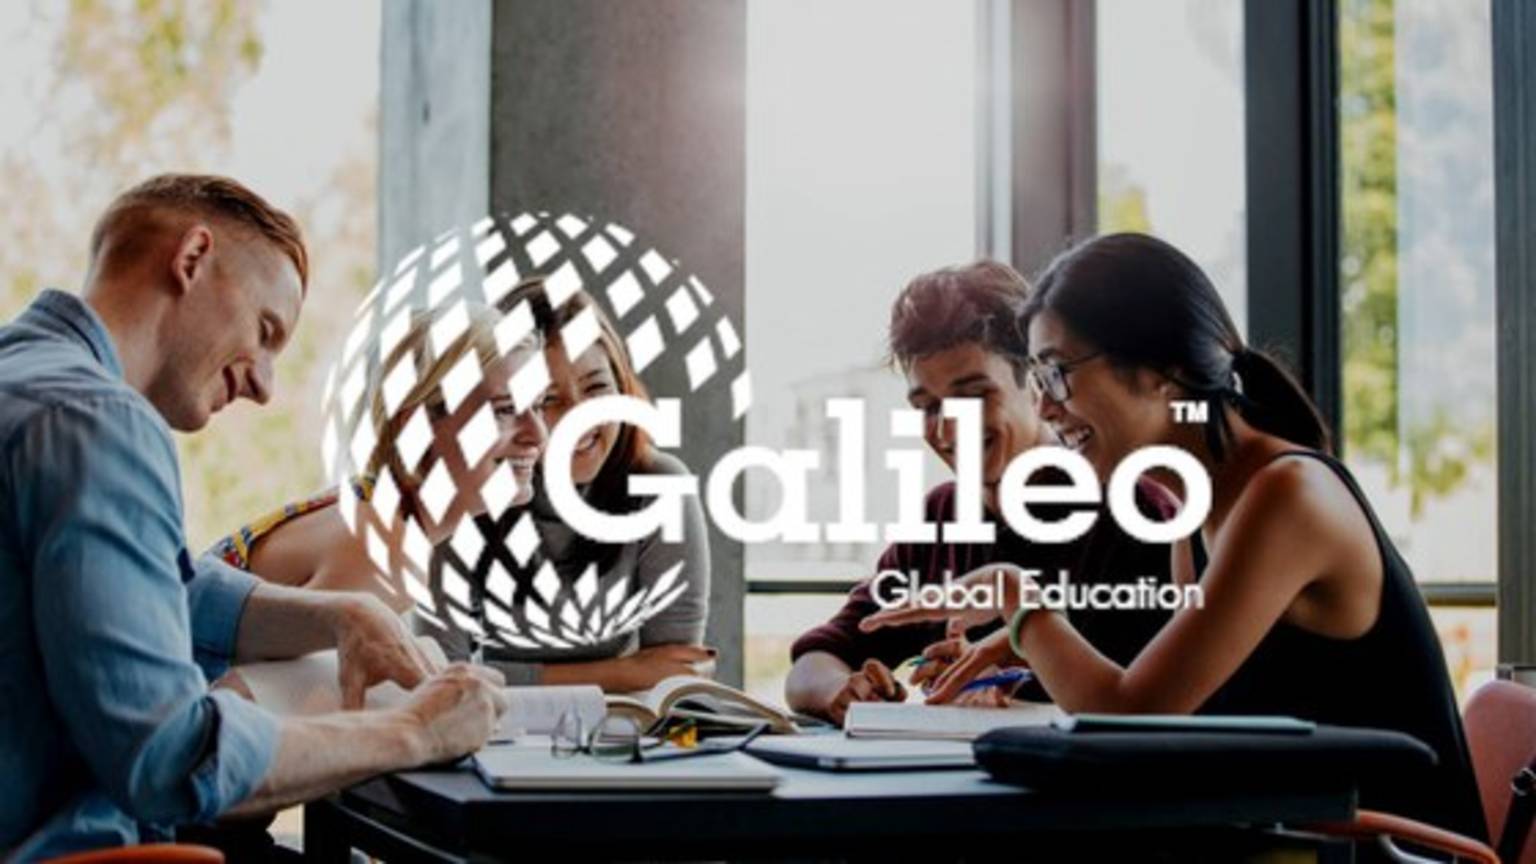 galileo-global-education-consolidation-cloud